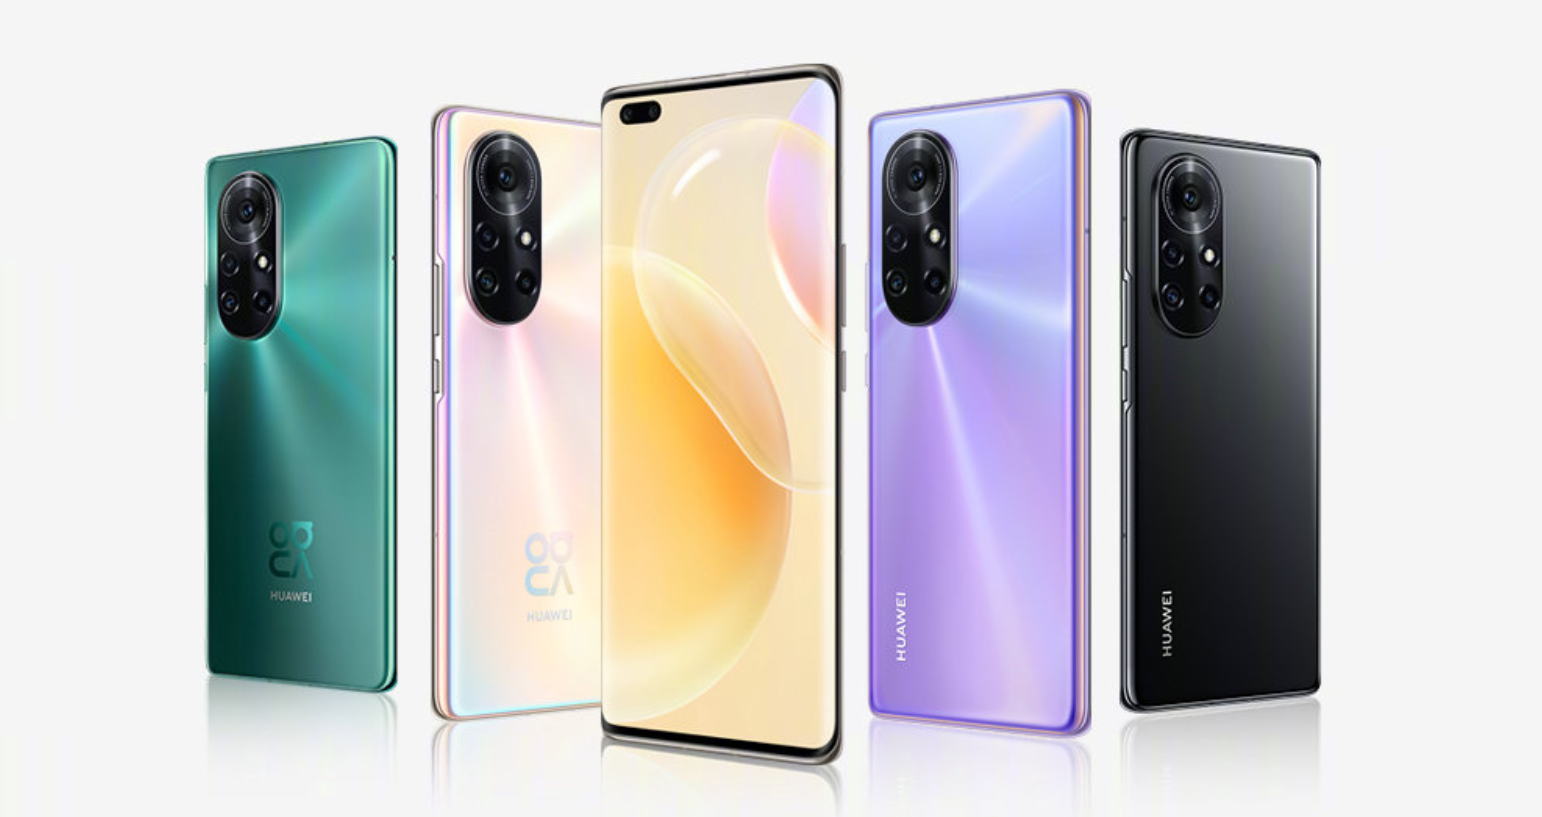 Huawei представила смартфоны Huawei Nova 8 и Nova 8 Pro (Huawei Nova 8 and Nova 8 Pro launched)